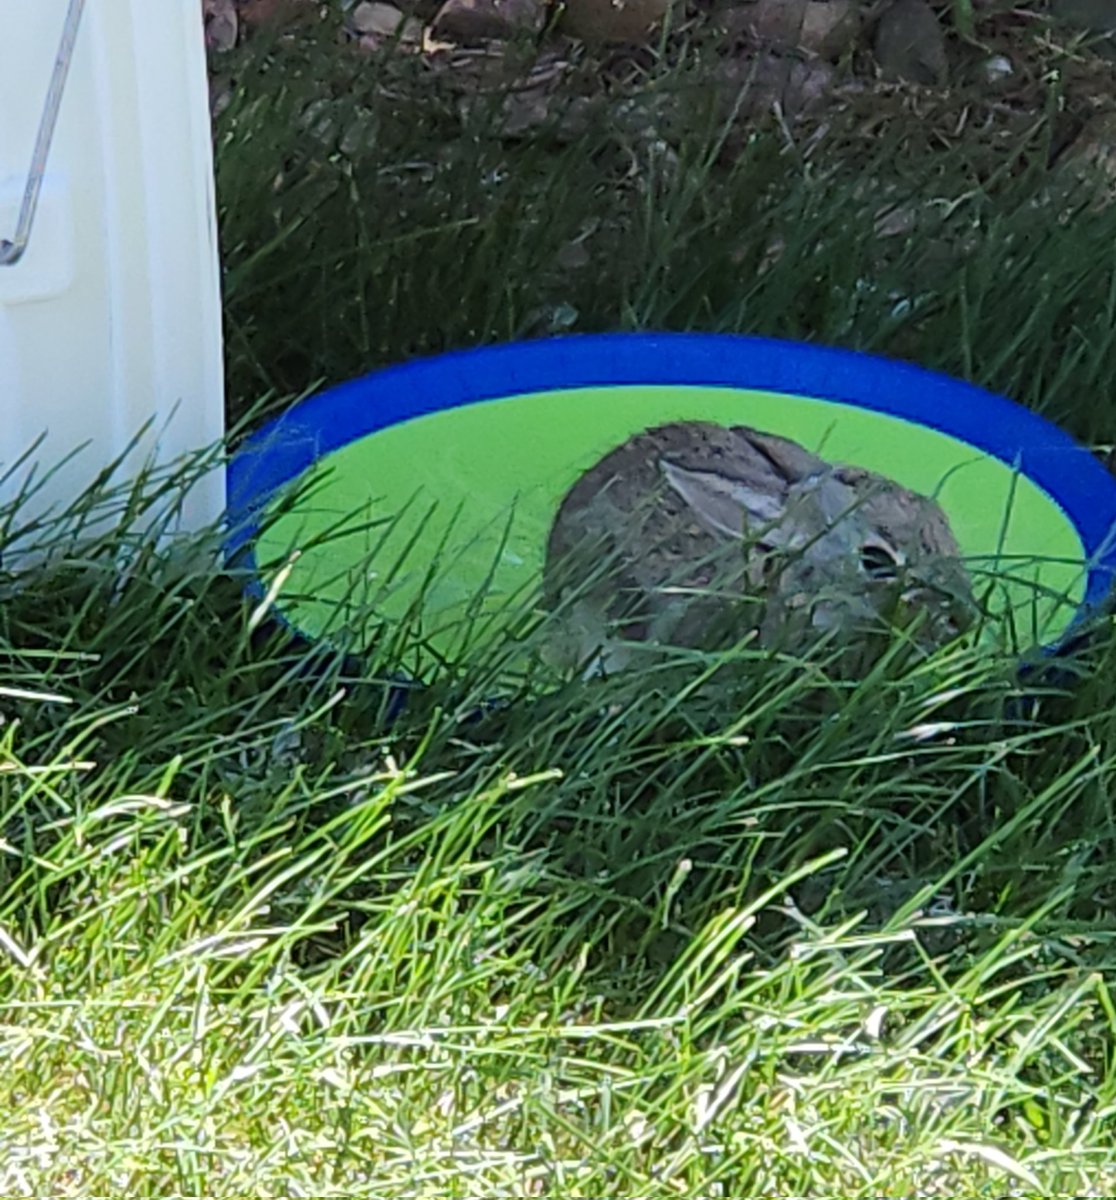 Bunny safe and hydrated :)